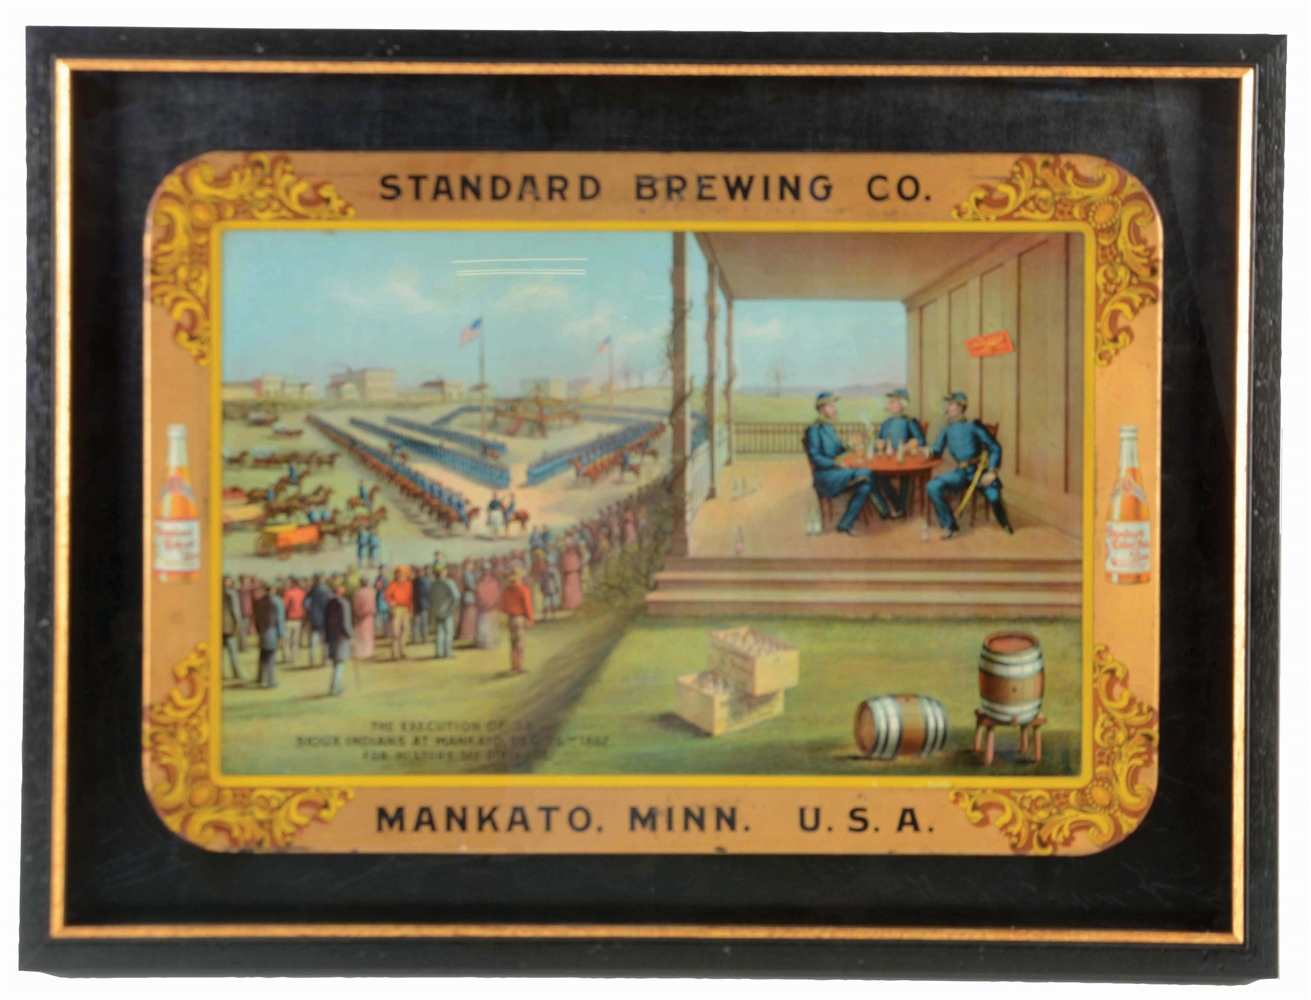 STANDARD BREWING CO. TIN LITHO ADVERTISING SIGN.